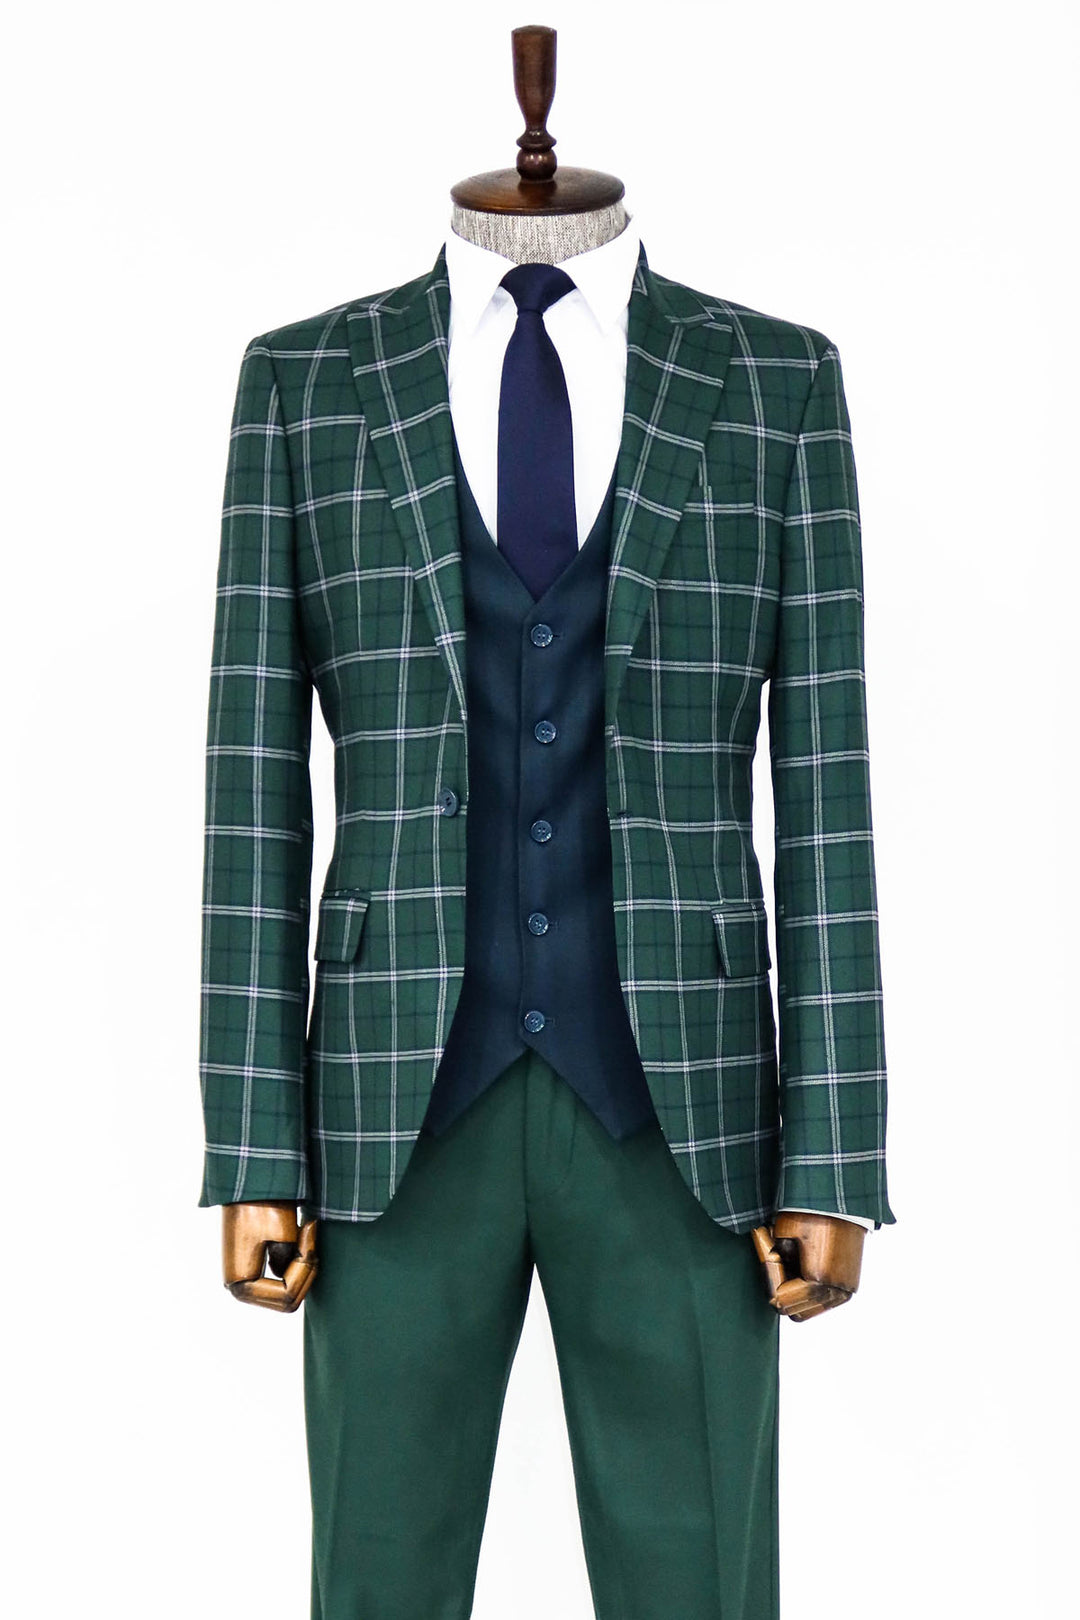 Blue Vested Slim Fit Checked Green Men Suit and Shirt Combination- Wessi